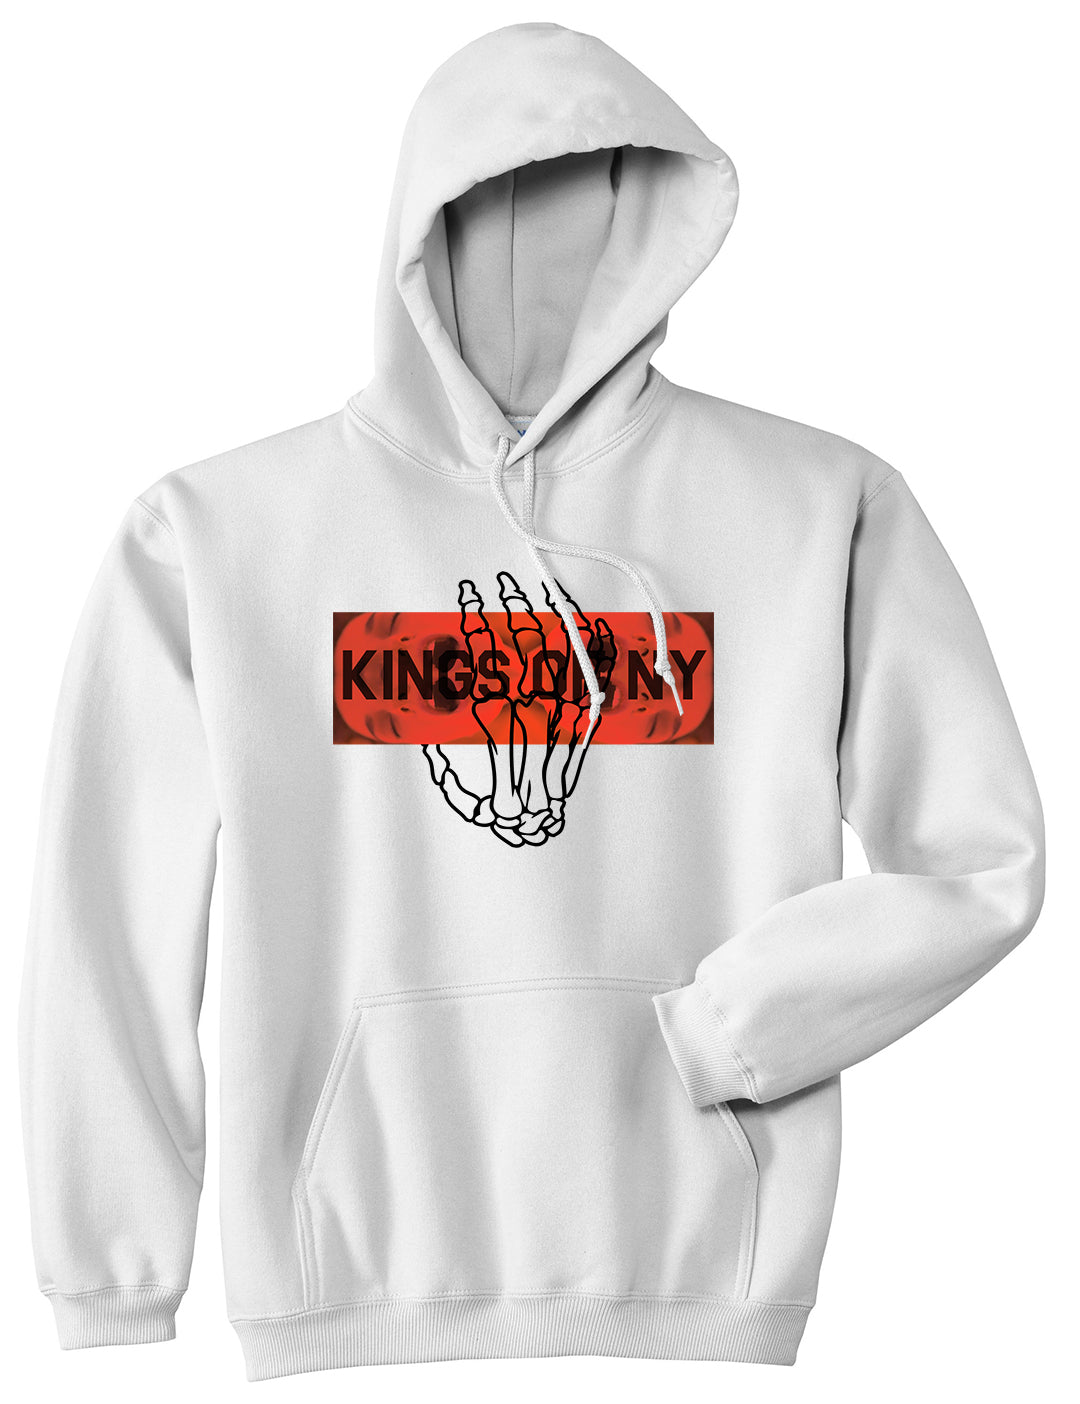 Dead Inside Skeleton Hand Mens Pullover Hoodie White by Kings Of NY